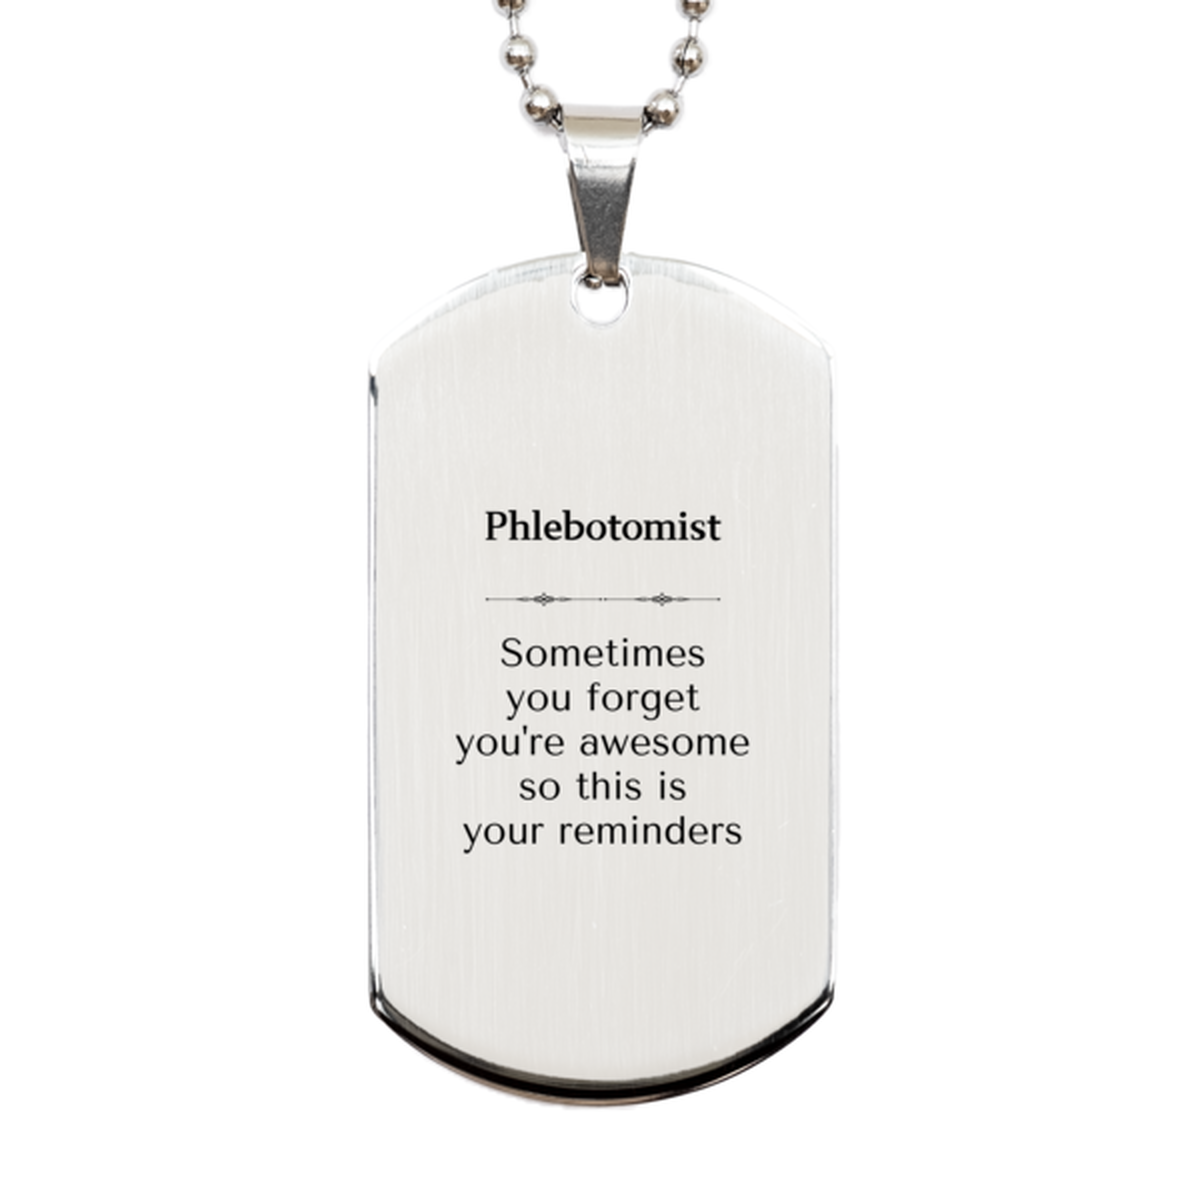 Sentimental Phlebotomist Silver Dog Tag, Phlebotomist Sometimes you forget you're awesome so this is your reminders, Graduation Christmas Birthday Gifts for Phlebotomist, Men, Women, Coworkers